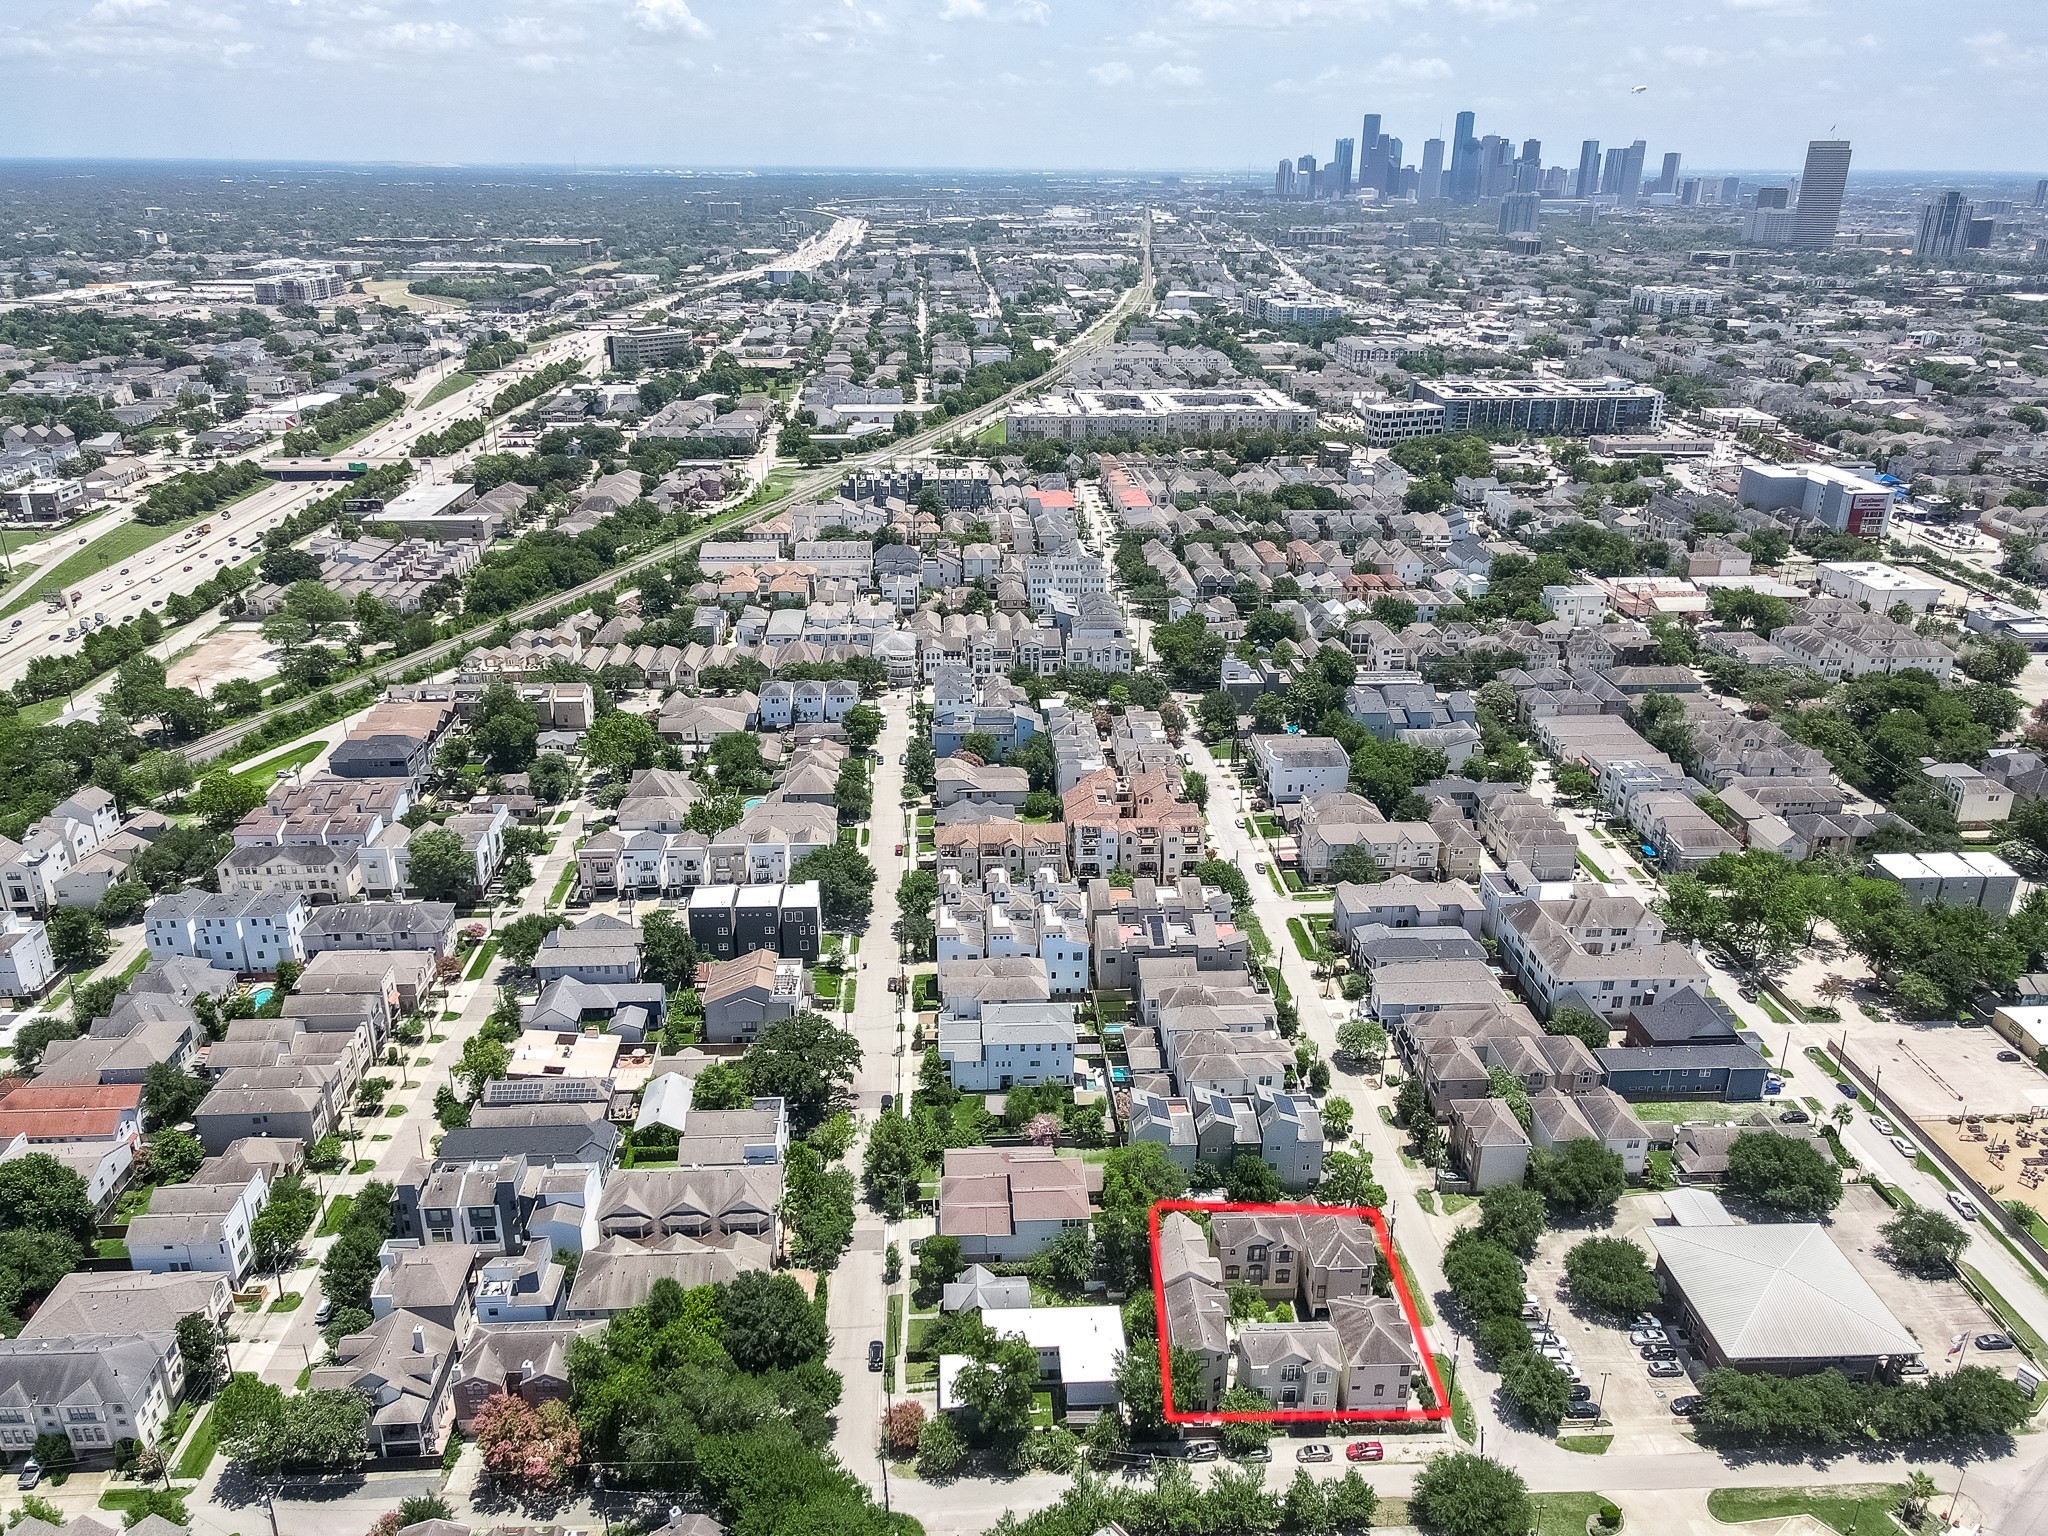 3 Minutes from access to 1-10 Freeway. Centrally Located! Less than 10 minutes from Downtown Houston and the Galleria Shopping District!